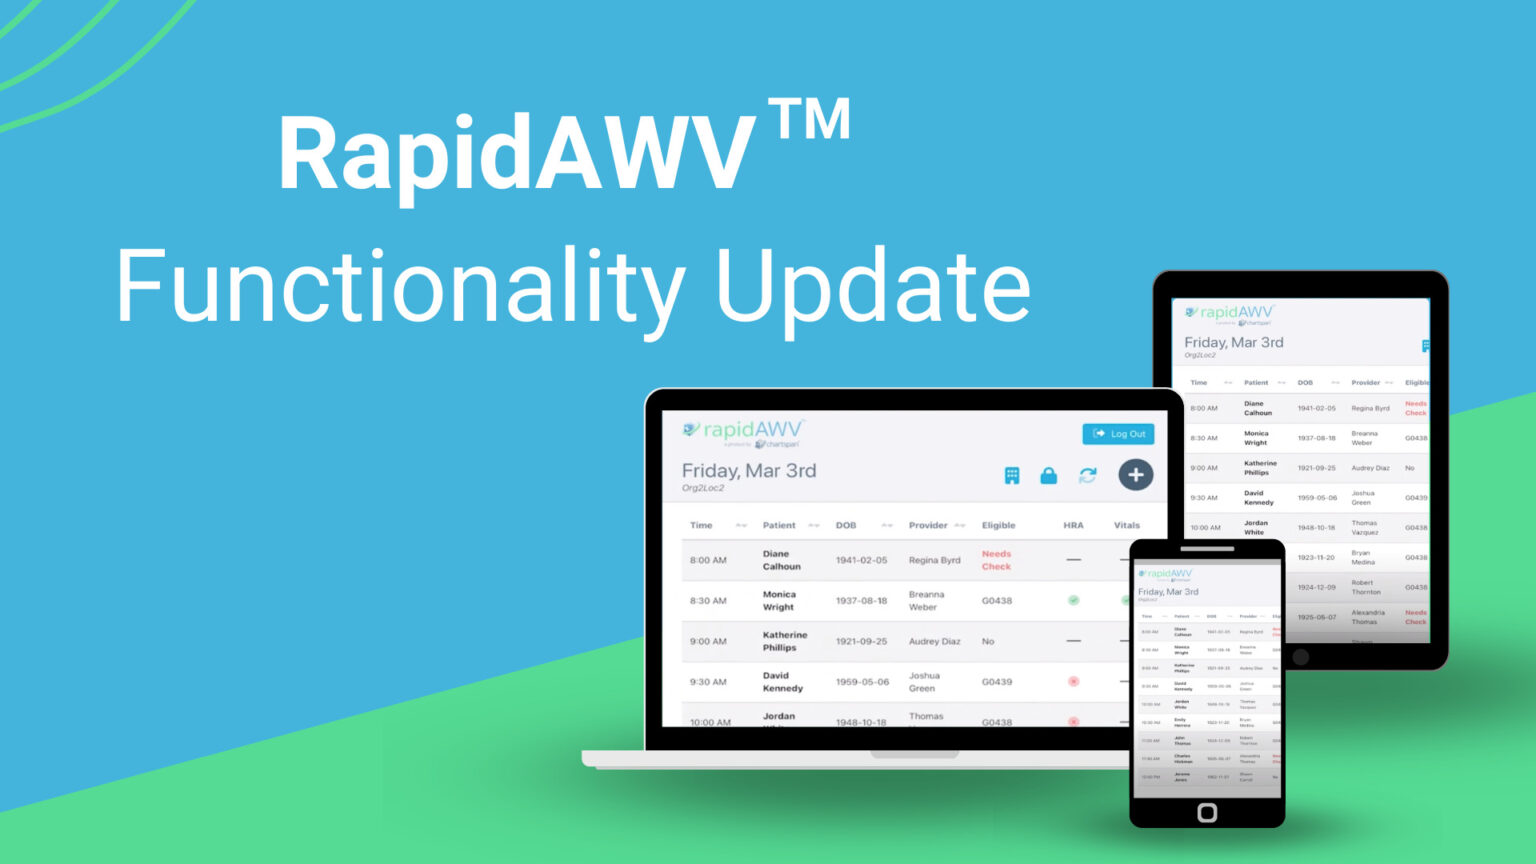 RapidAWV™ – Now optimized for any device!